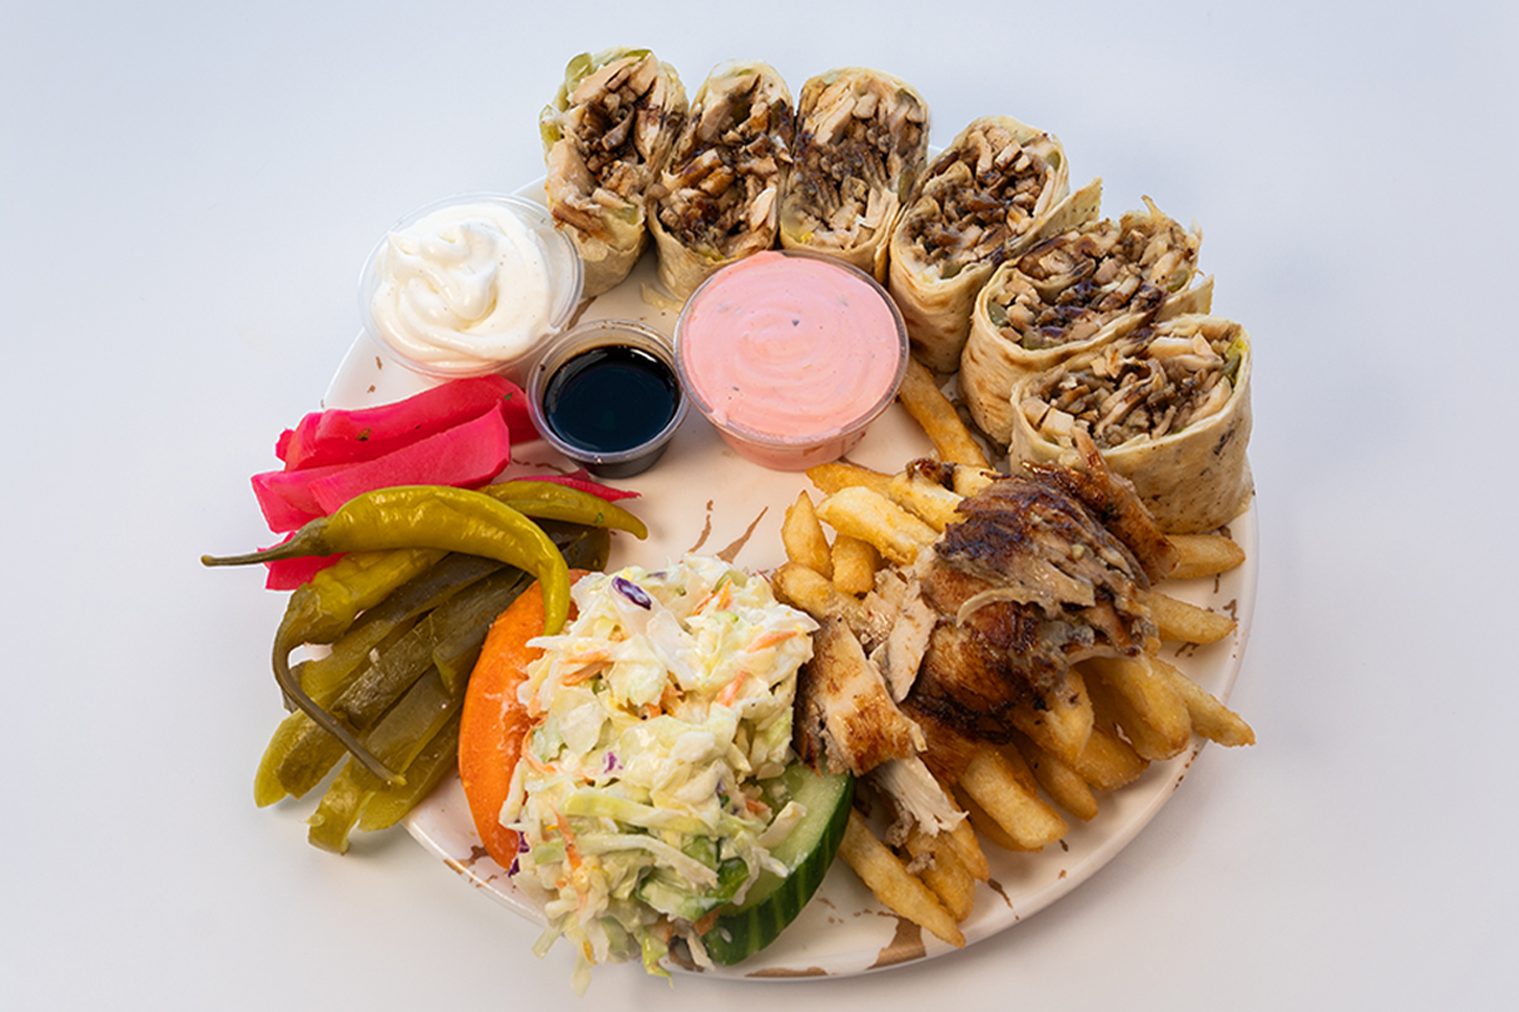 Indulge in the sumptuous flavors of Anas Turkey Shawarma Meals. Delicately spiced turkey, accompanied by pickles, tomatoes, parsley, onions, pomegranate molasses, and tahini sauce. Served with fries, coleslaw, pickles, turnip, and chili pepper. Explore our menu for a Turkish delight on your plate!